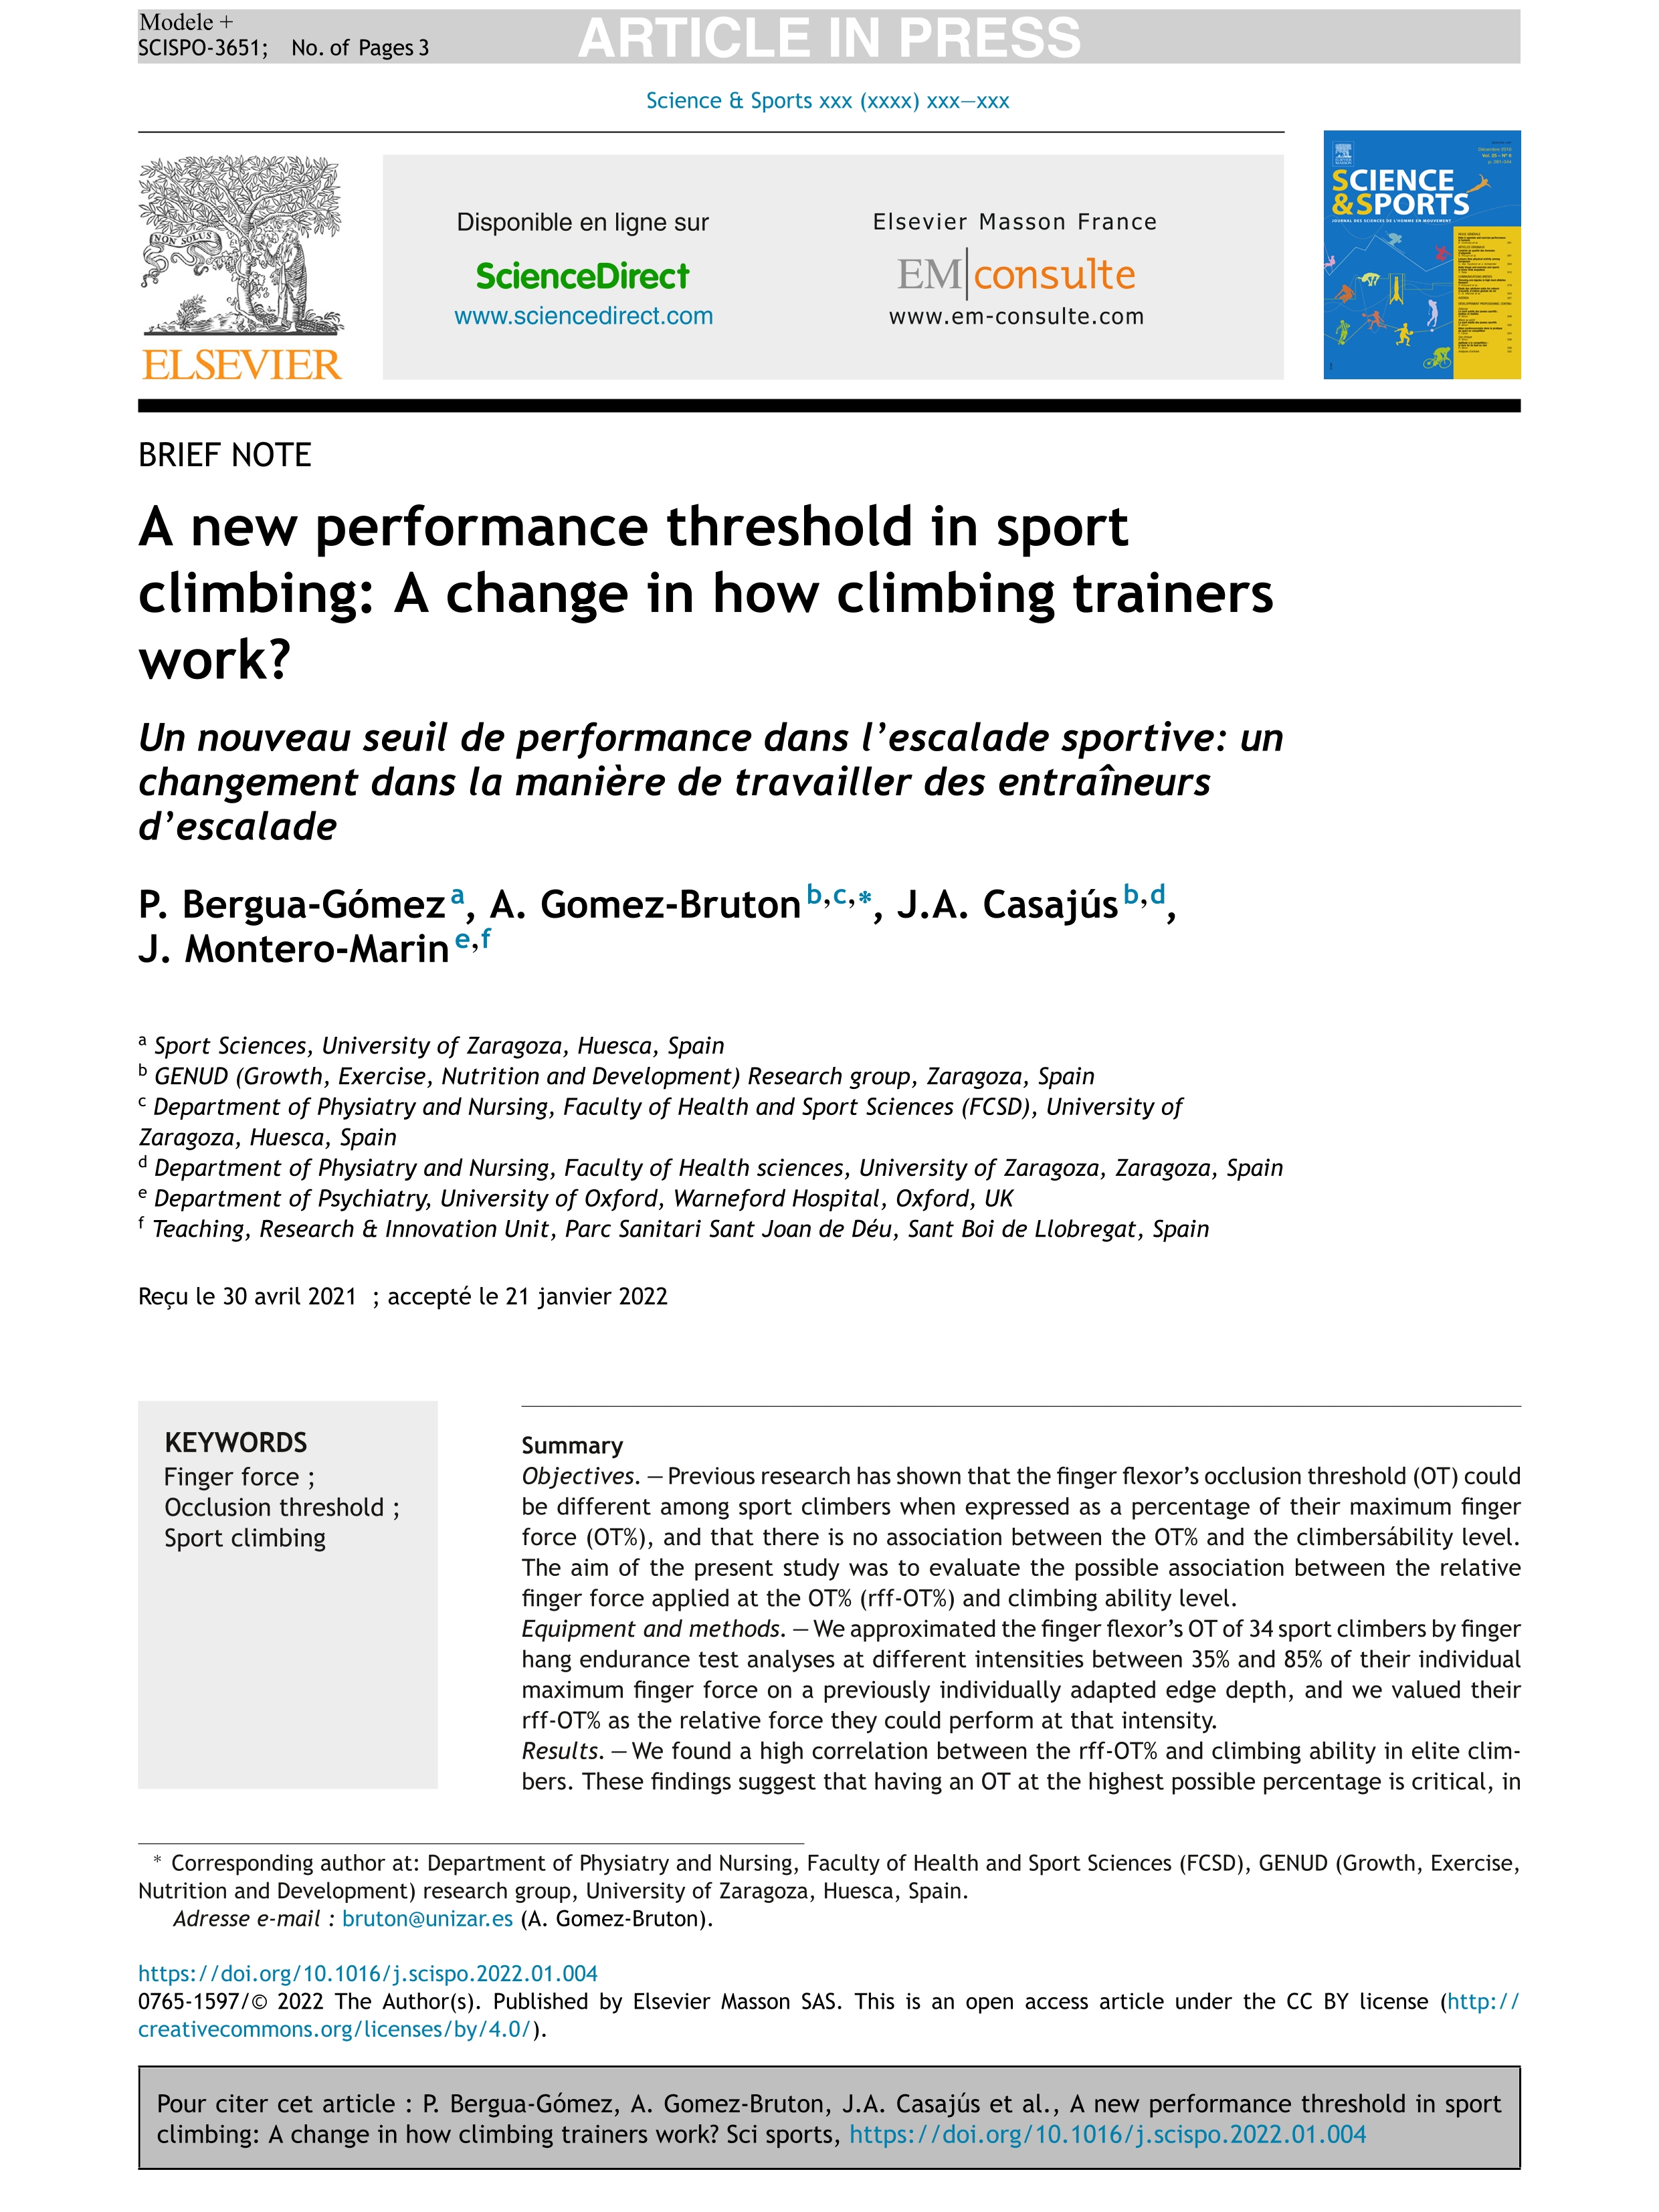 A new performance threshold in sport climbing: A change in how climbing trainers work?